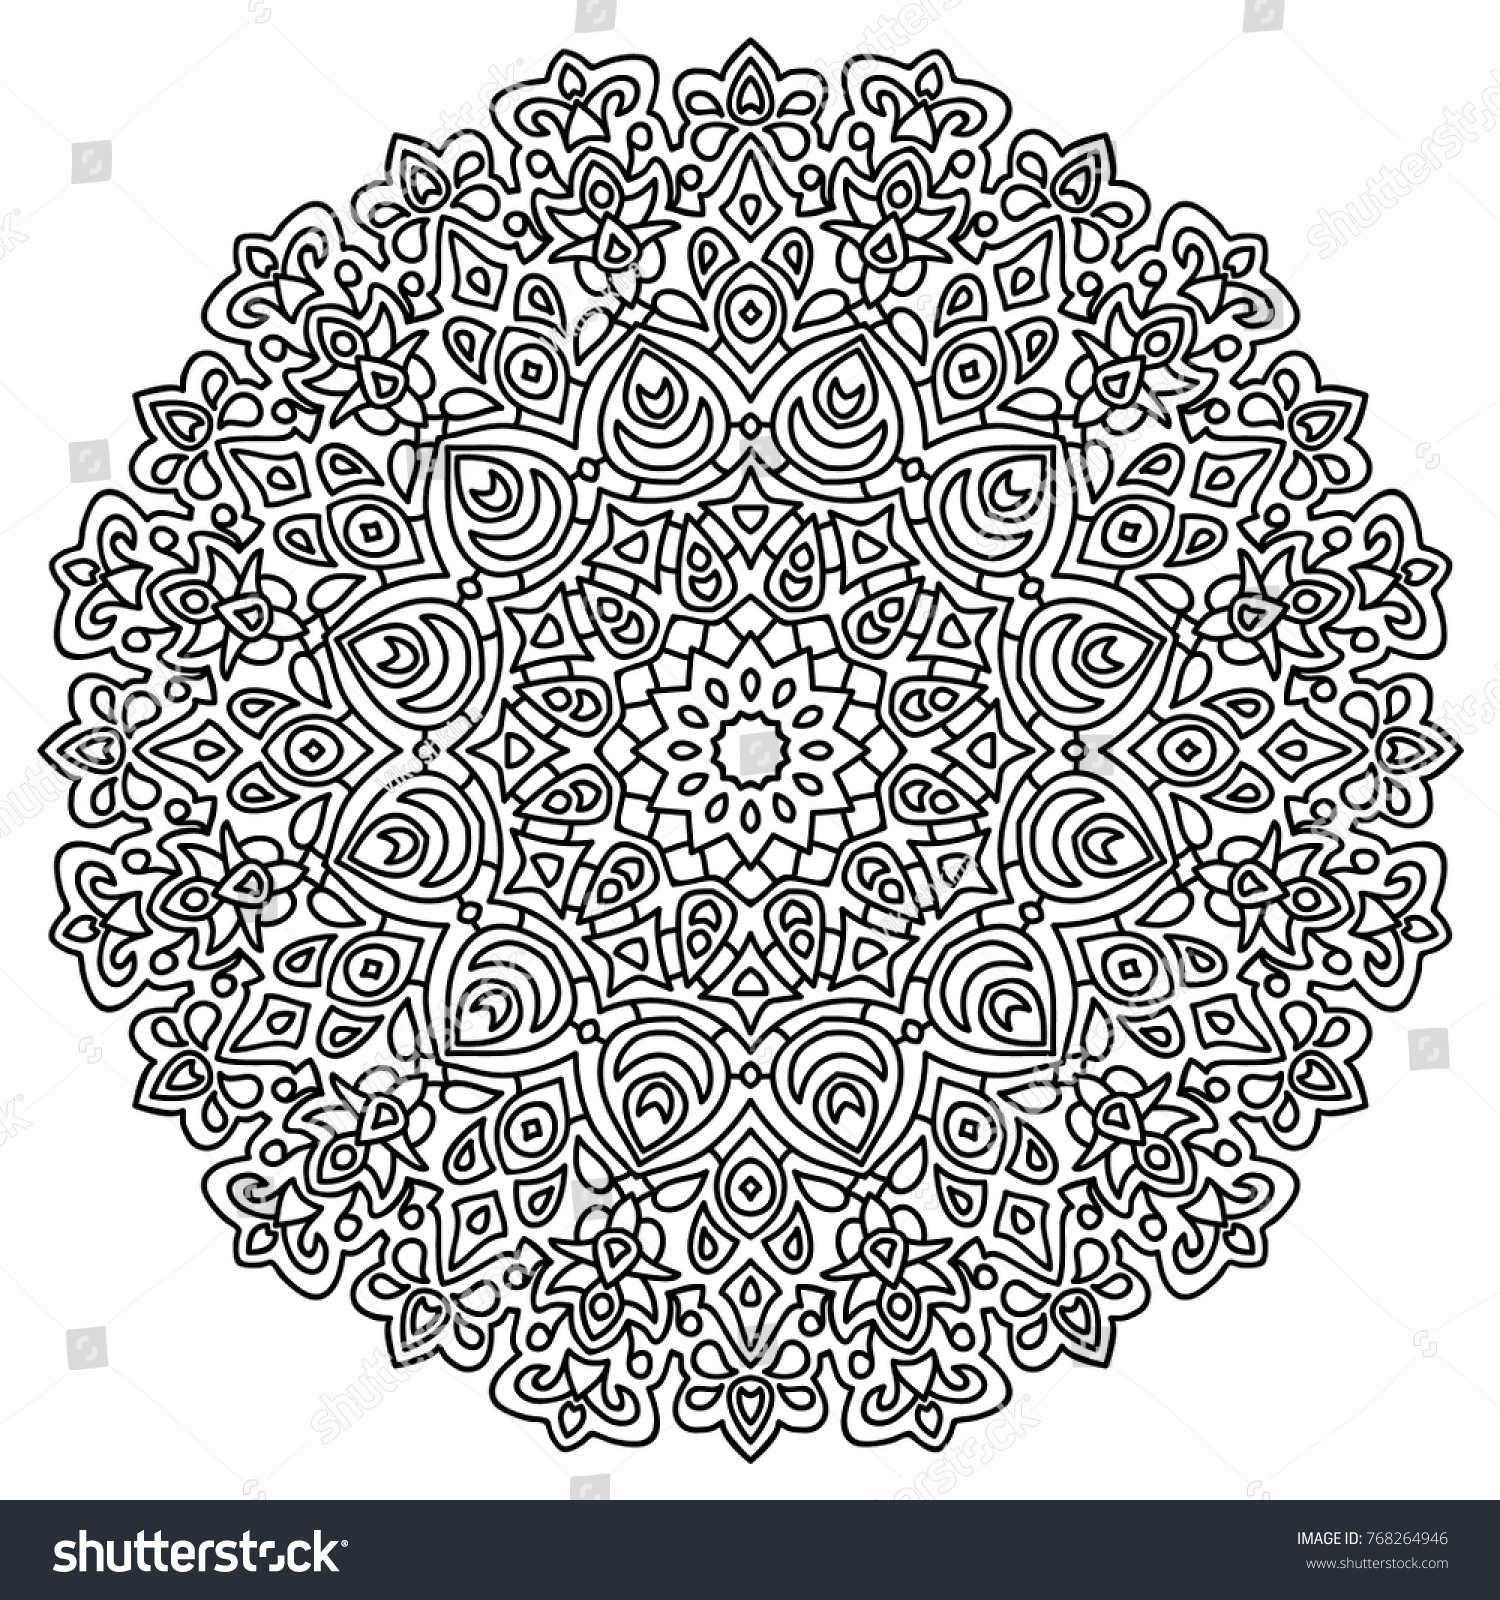 Ethnic Mandala for Adult Coloring Book Black and White Round Pattern in Orient Style